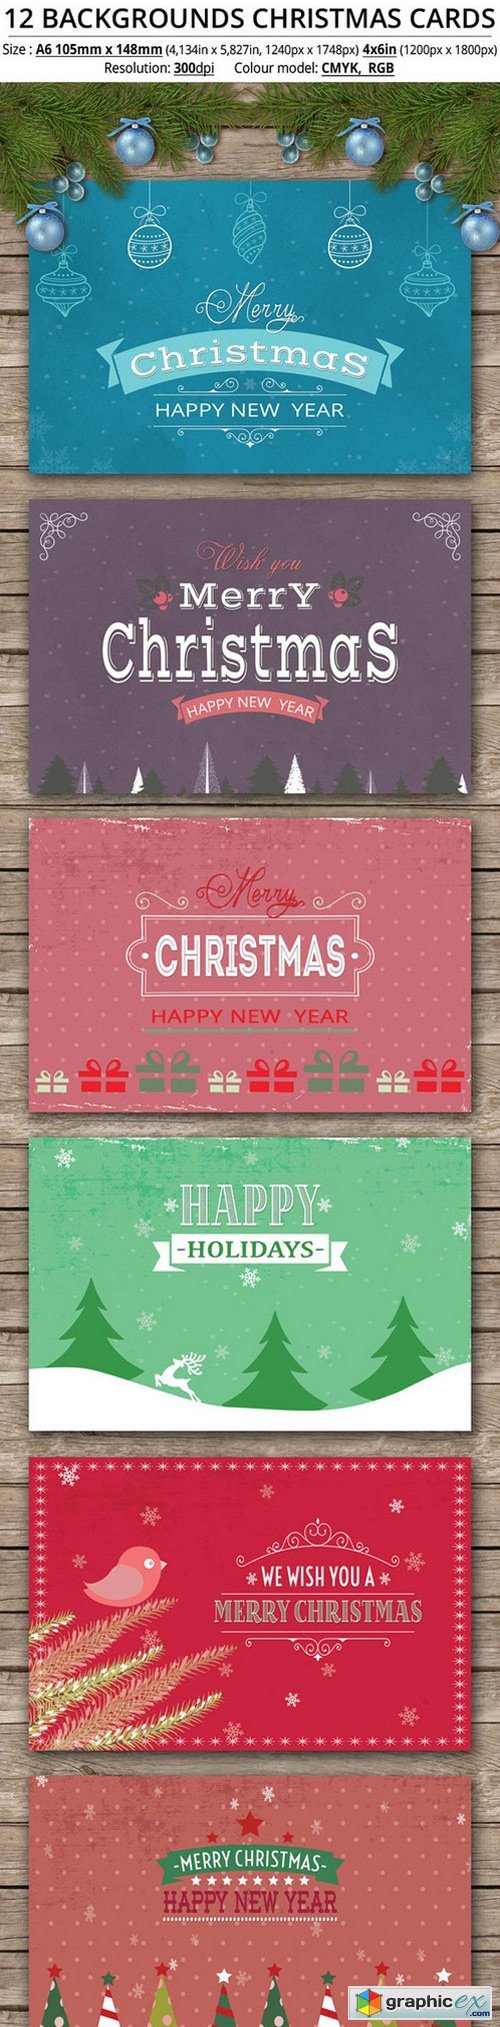 12 Backgrounds Christmas Cards